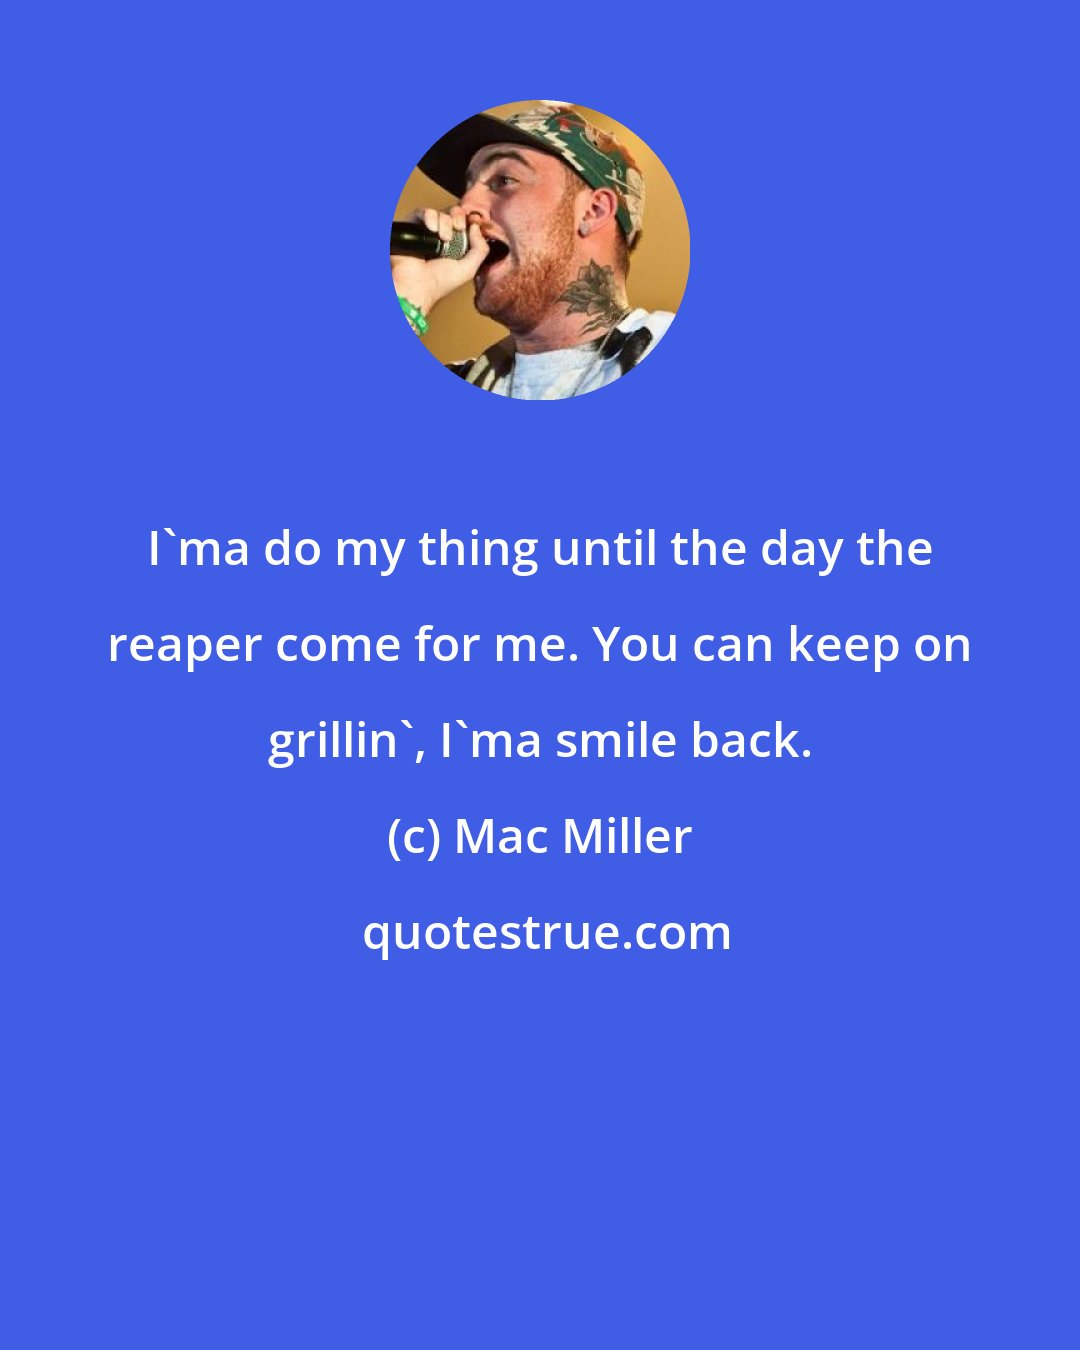 Mac Miller: I'ma do my thing until the day the reaper come for me. You can keep on grillin', I'ma smile back.